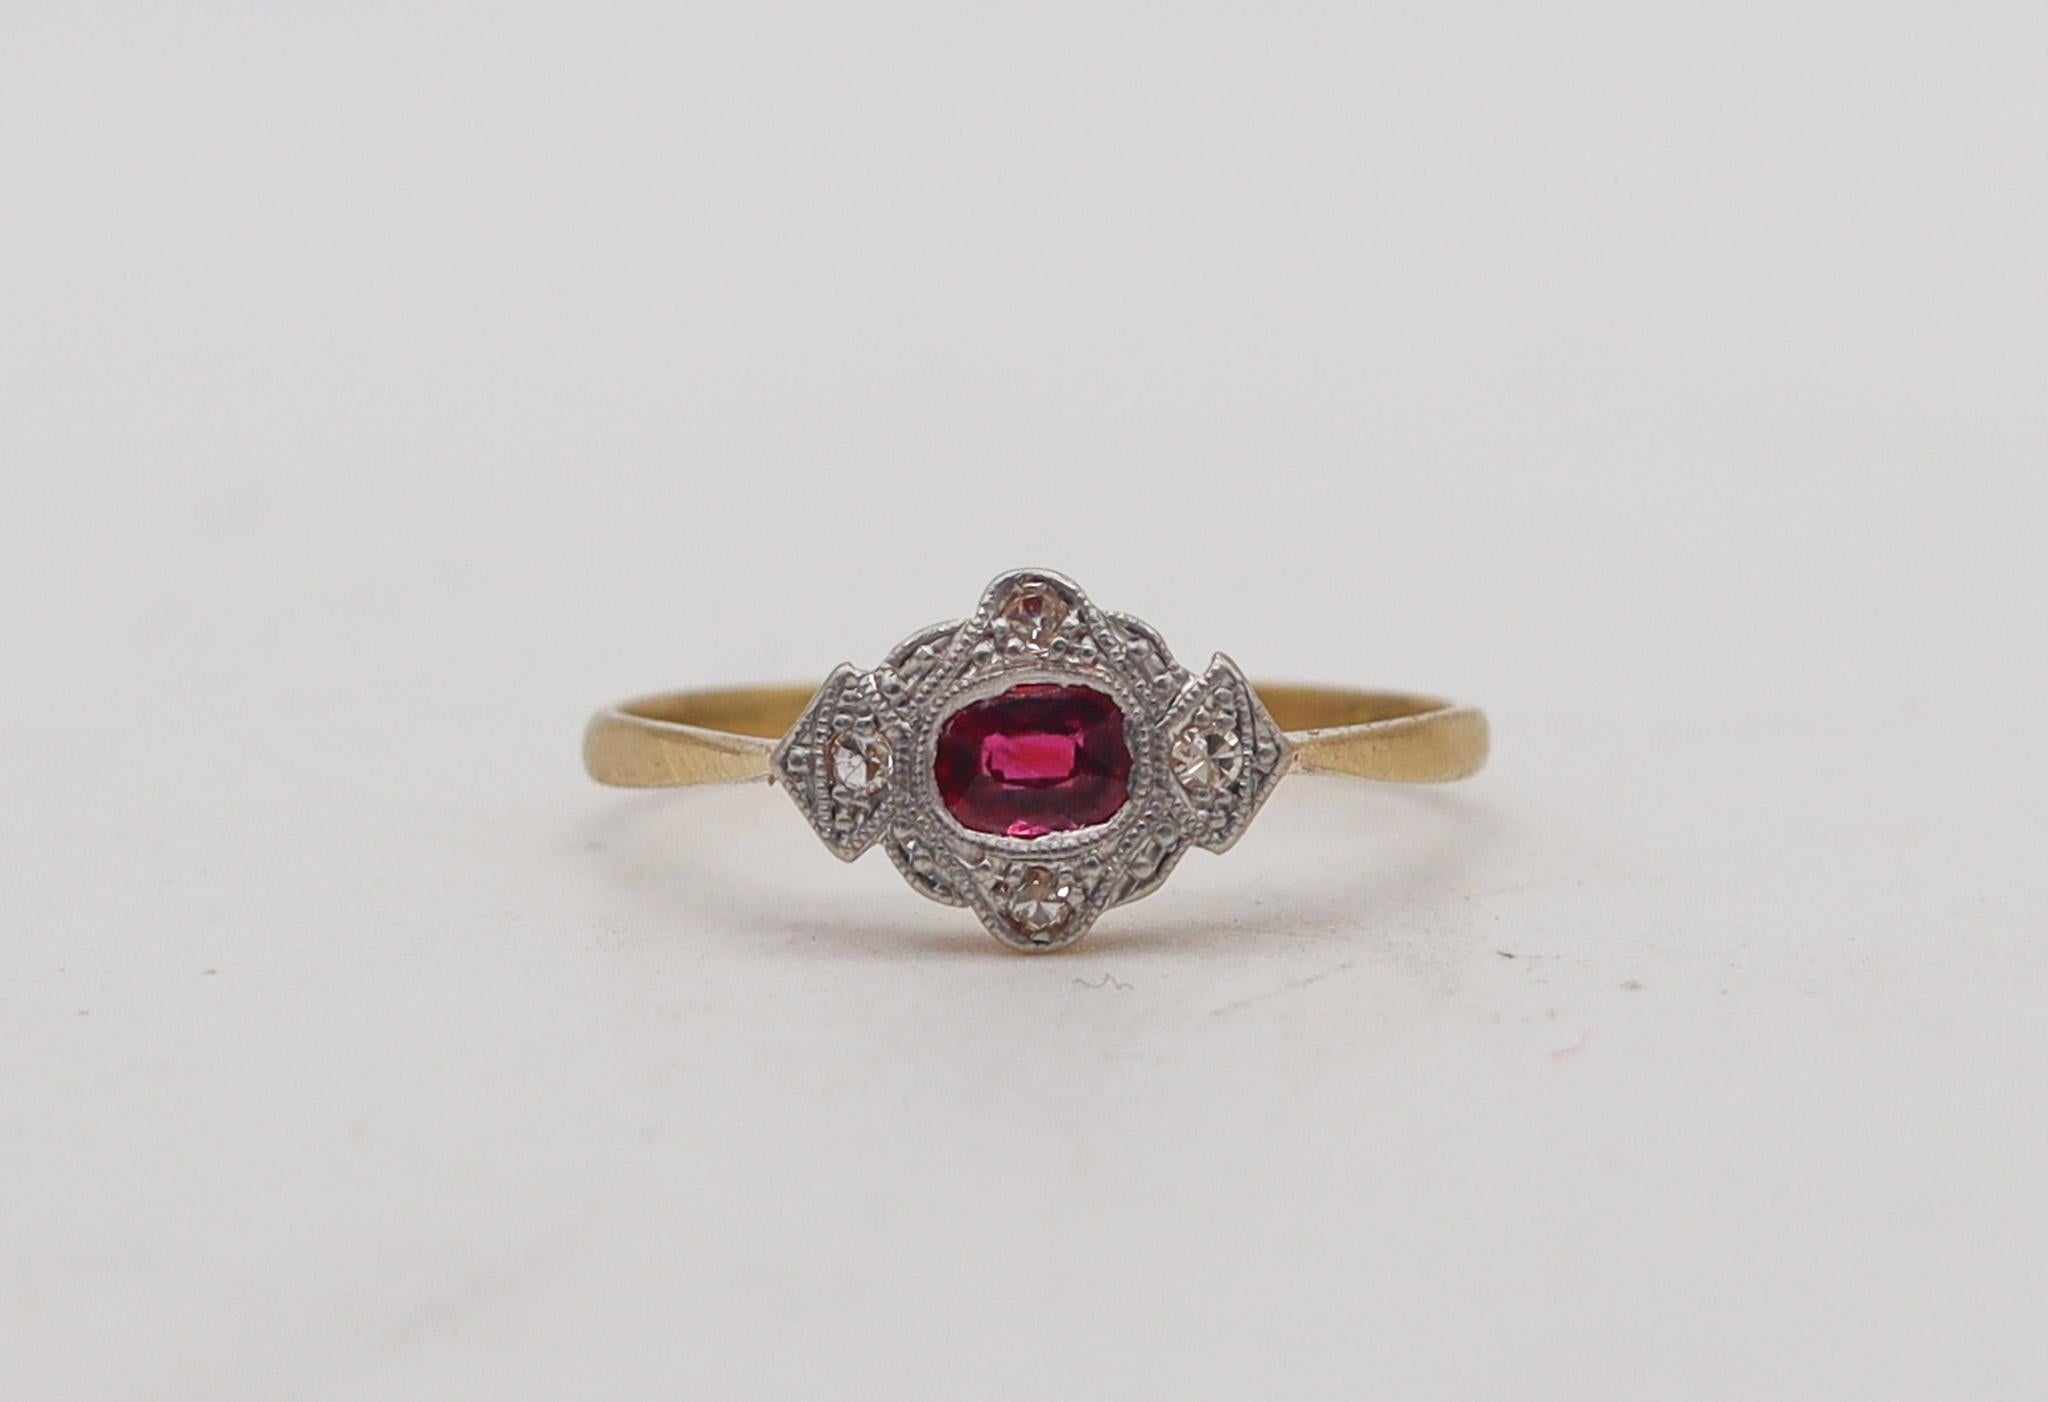 Edwardian ring with diamonds and ruby.

A beautiful antique ring from the Belle Epoque period, created in England during the Edwardian period, back in the 1905. This stunning ring was crafted in solid Yellow gold of 18 karats and topped with